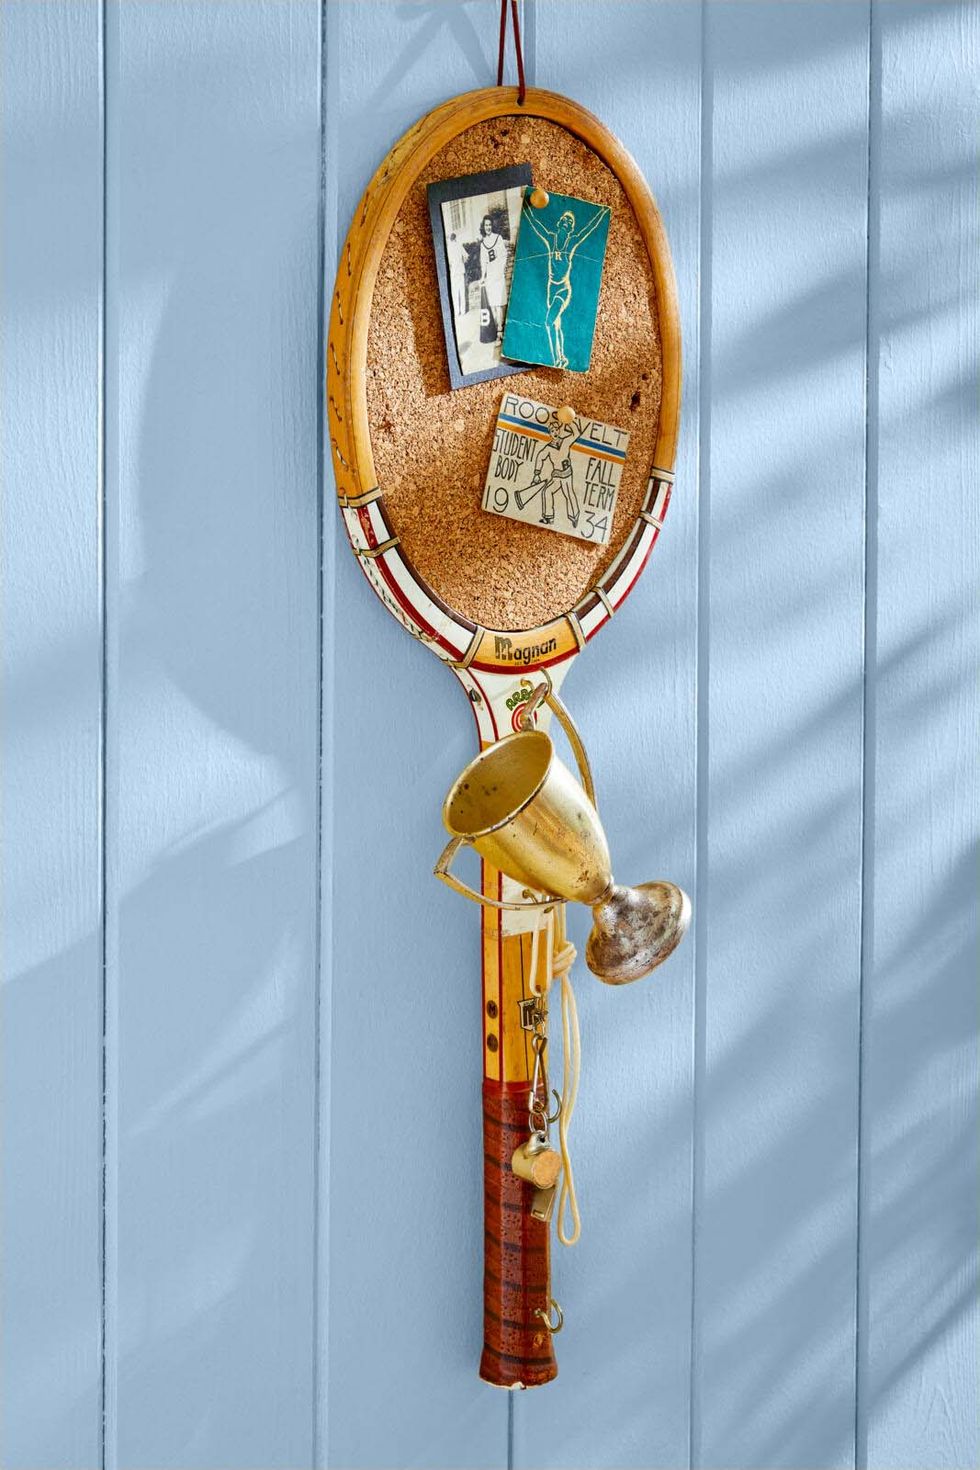 vintage tennis racquet turned into a pin board hanging on a light blue wall